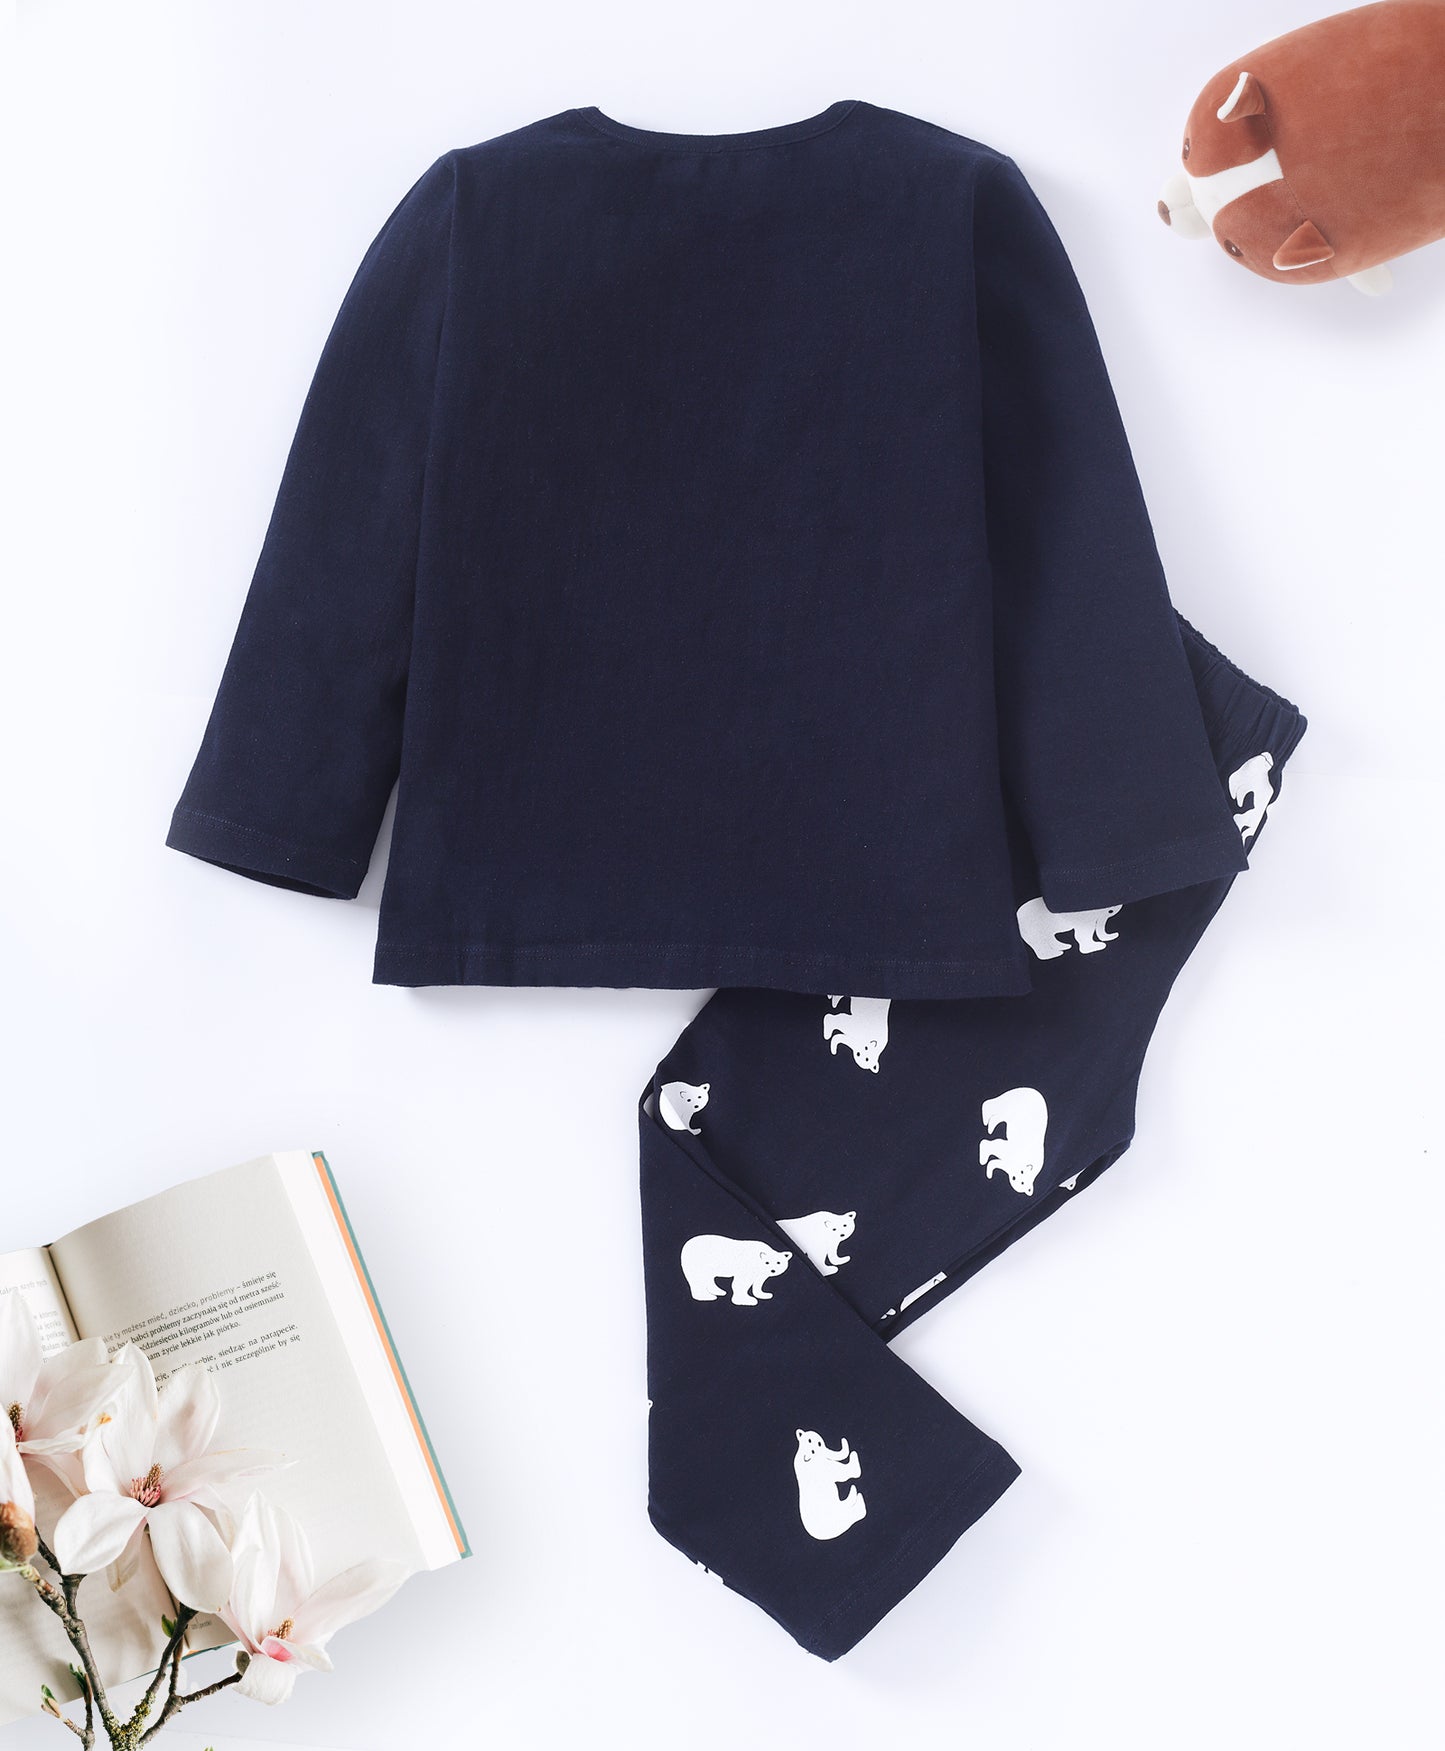 Navy Blue & Pink Pure Cotton Knitted Full Sleeves Bear & Cow Printed Nightsuit for Girls - Pack of 2